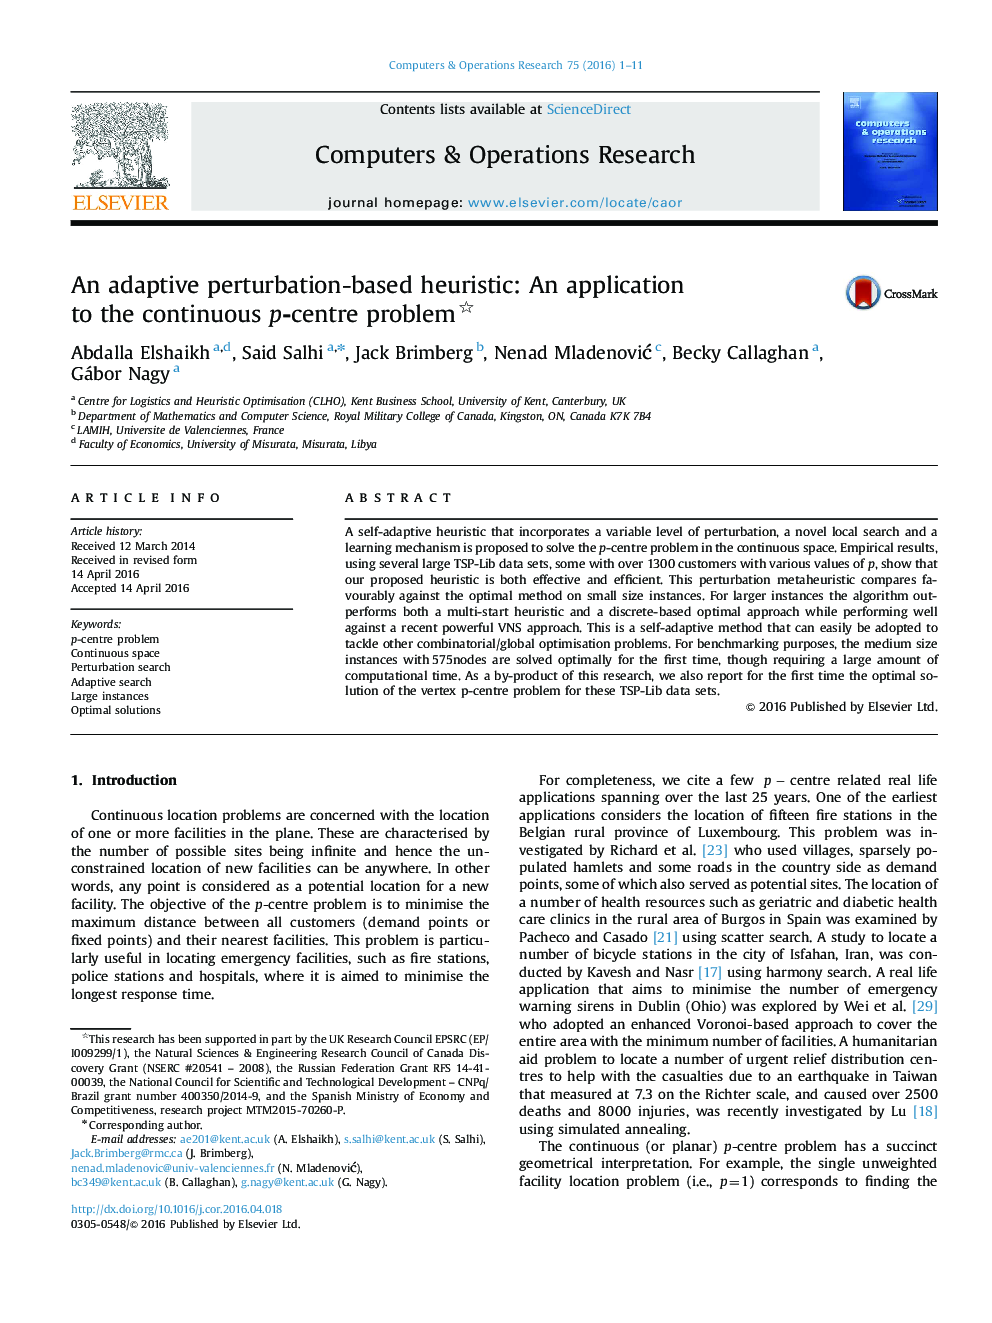 An adaptive perturbation-based heuristic: An application to the continuous p-centre problem